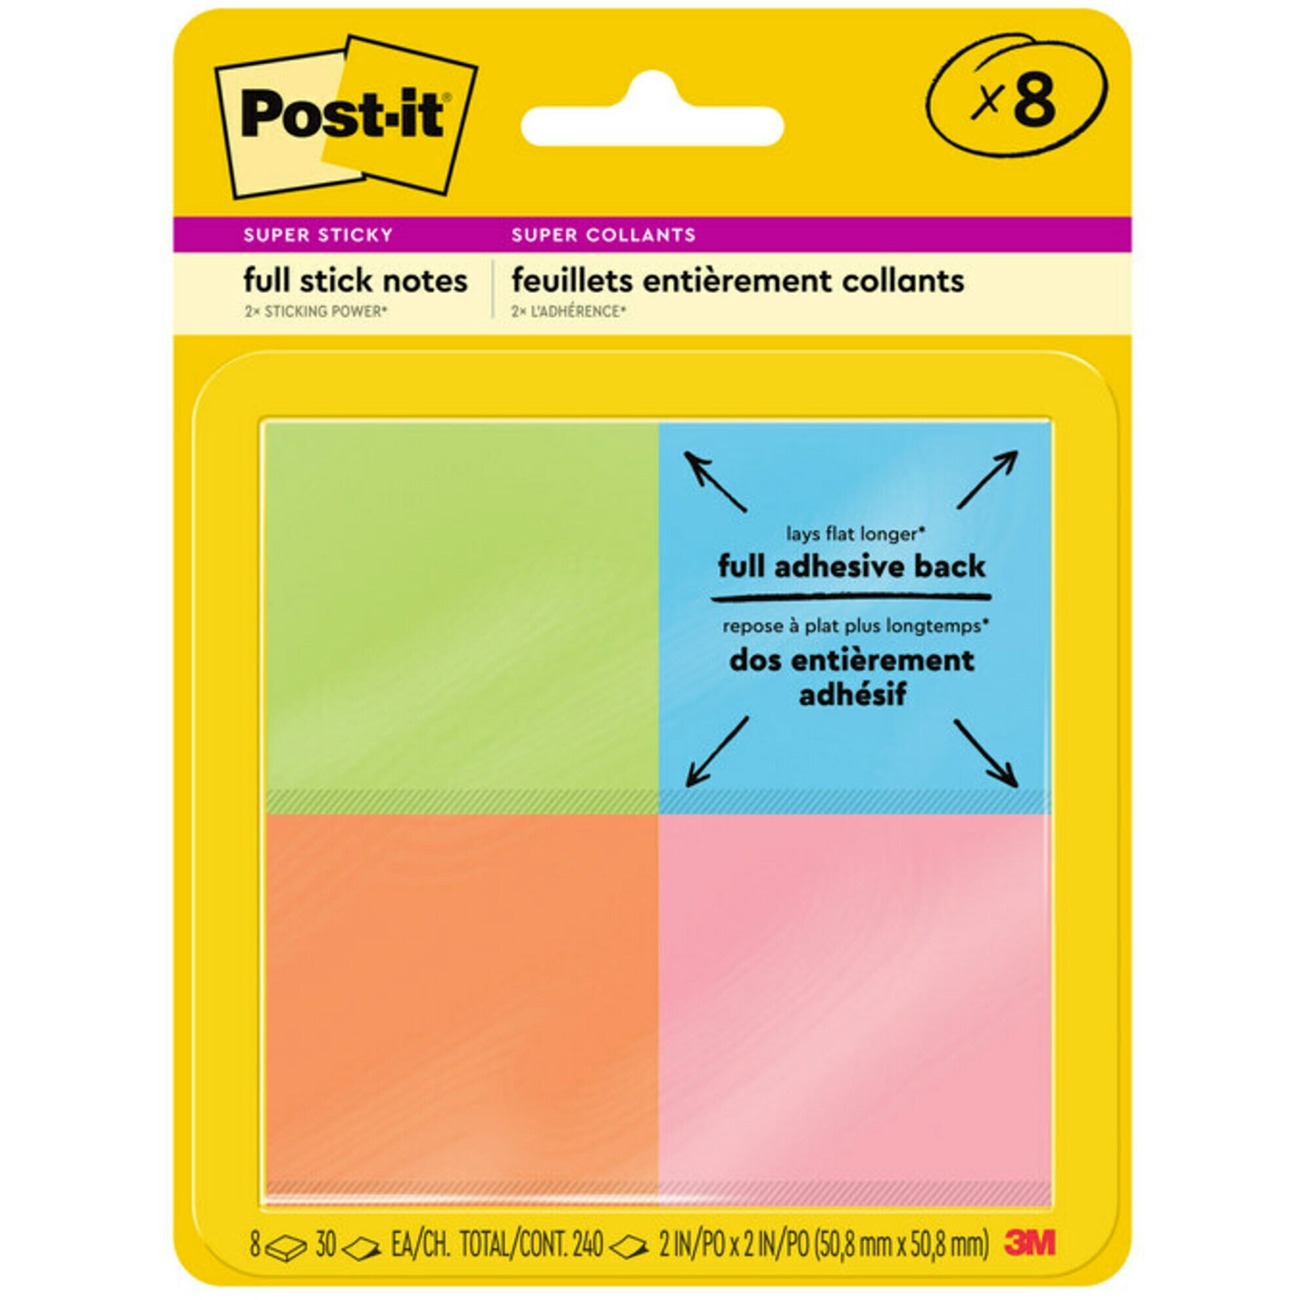 Post it Super Sticky Notes 4 in x 6 in 5 Pads 90 SheetsPad 2x the Sticking  Power Canary Yellow Lined - Office Depot